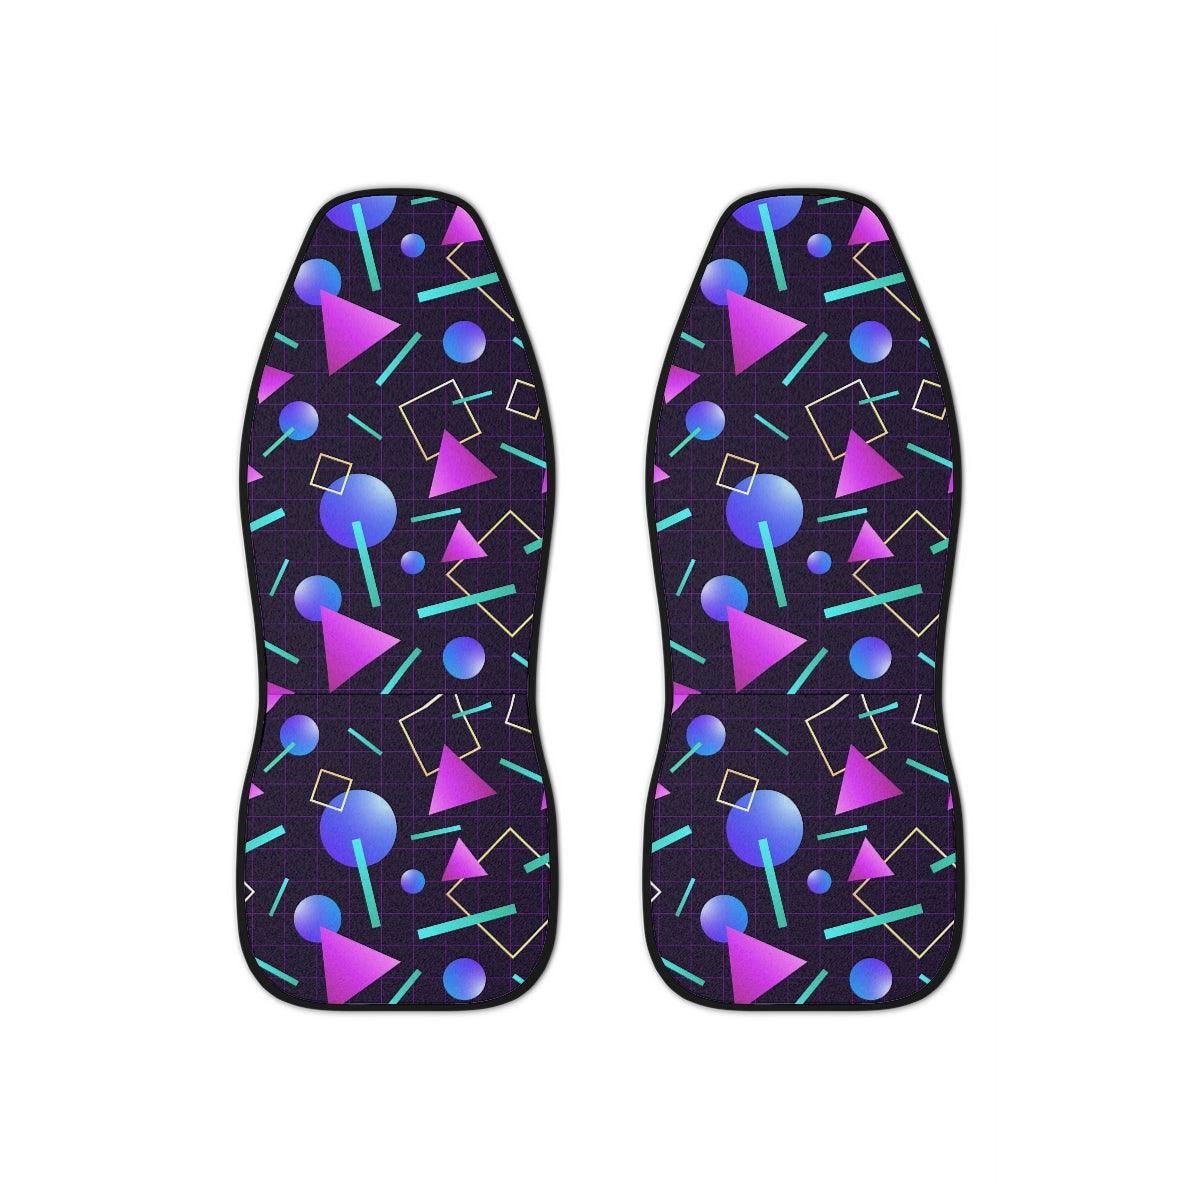 Retro 80's and 90's Aesthetic Vaporwave Throwback Blue & Purple Car Seat Covers | lovevisionkarma.com